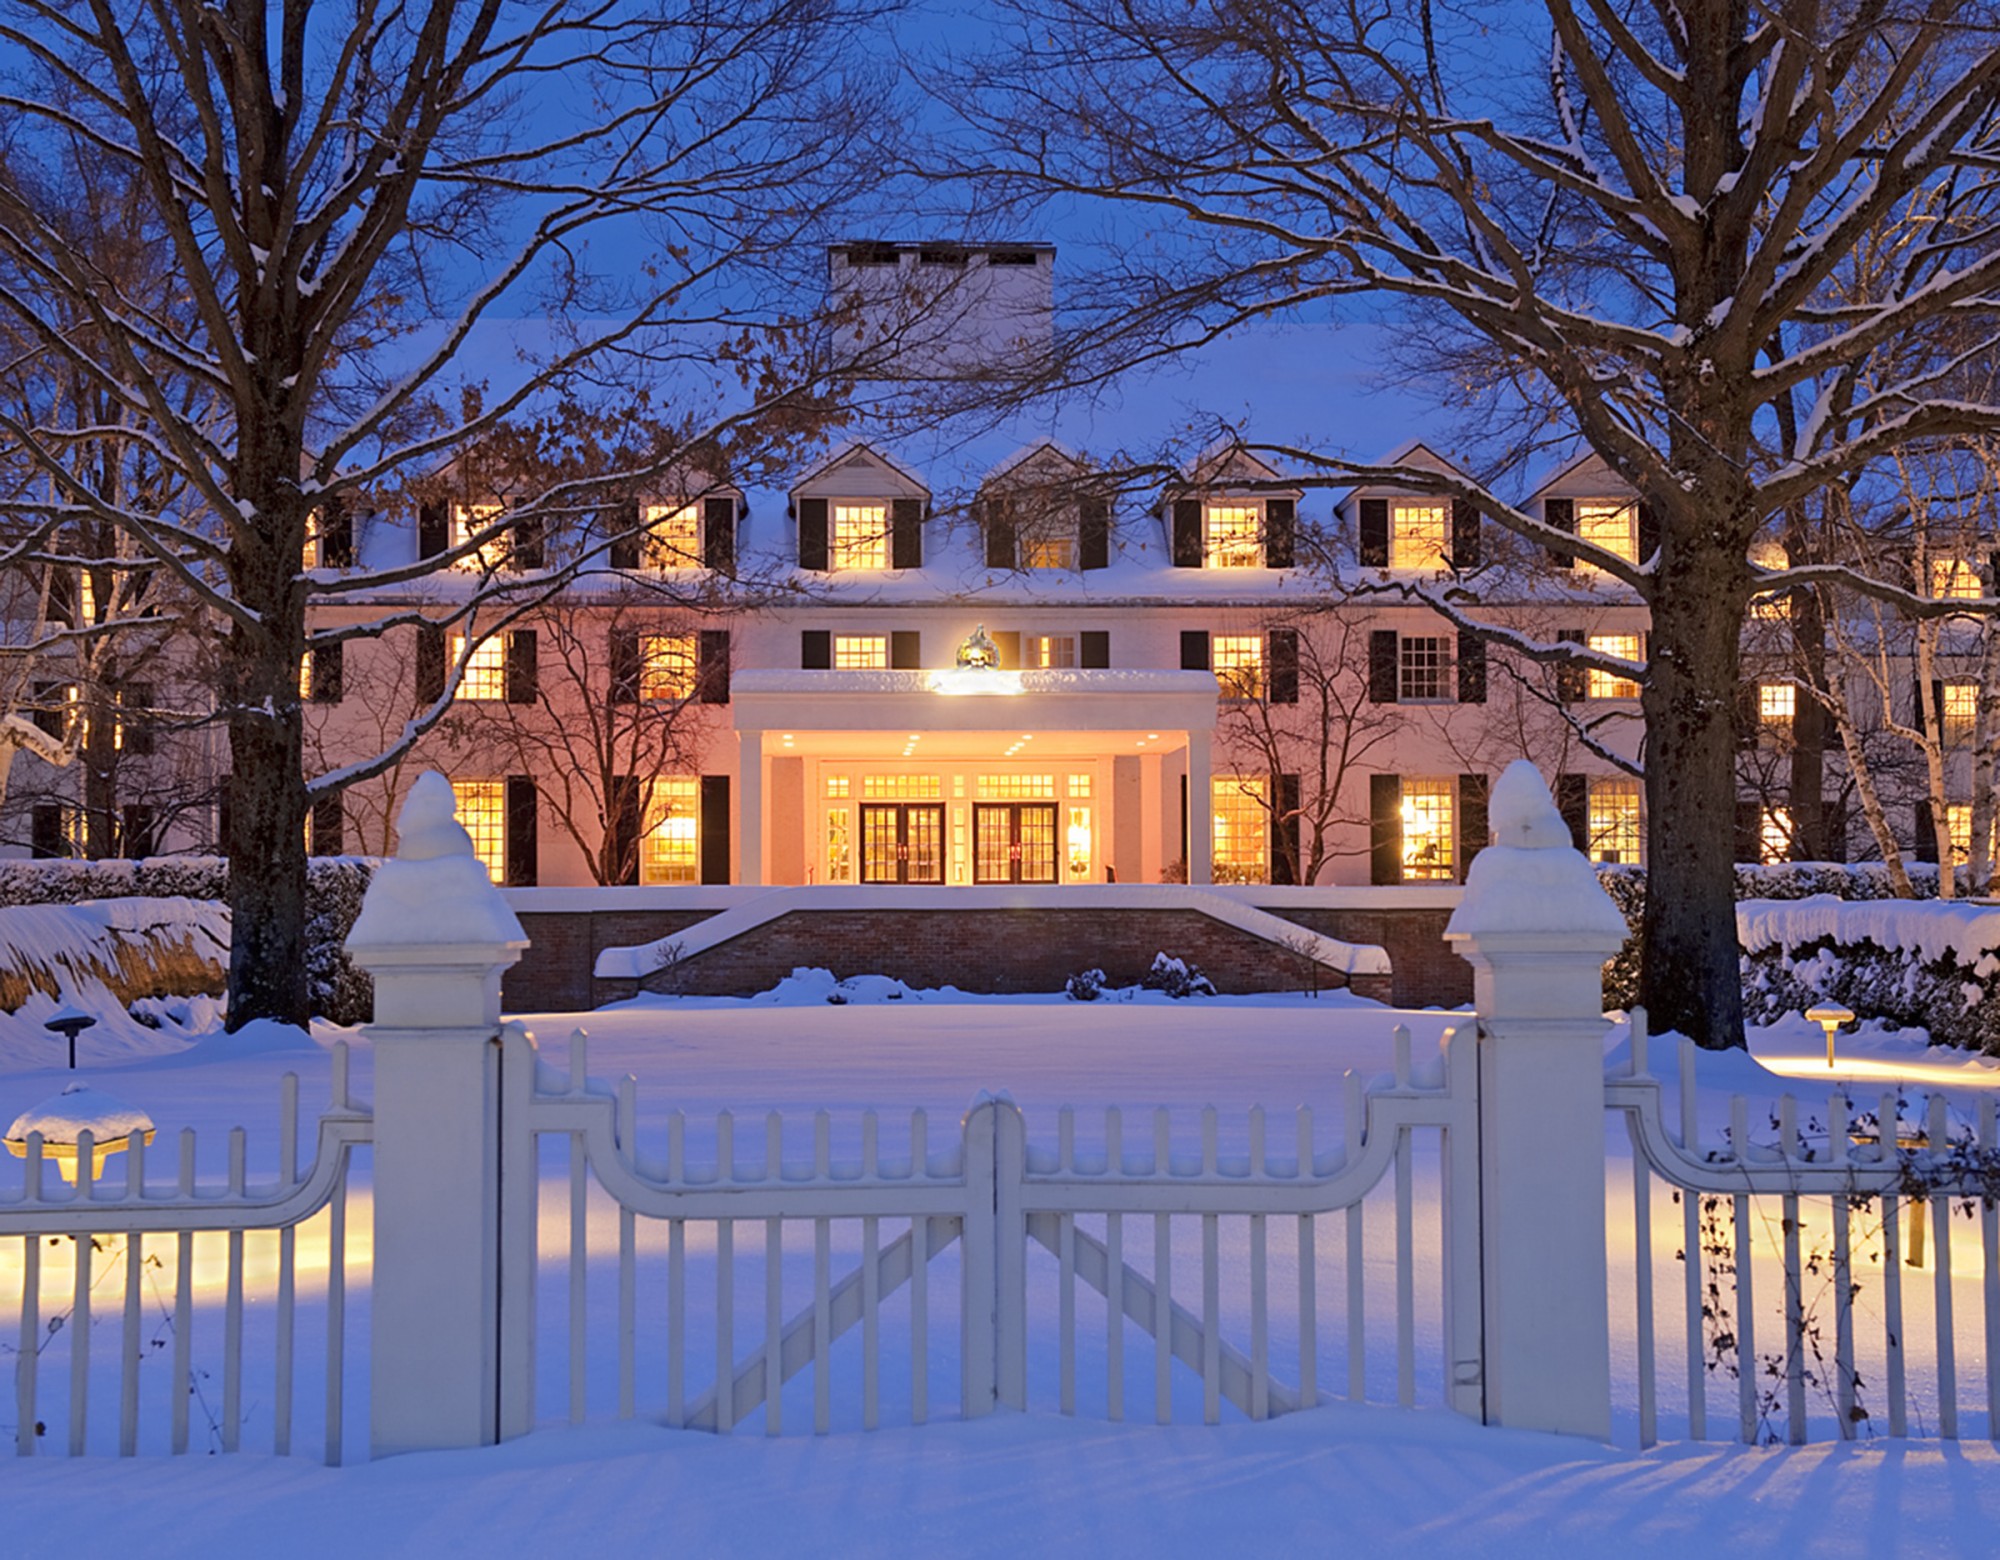 All White Winter Outfit at Woodstock Inn 10% Booking Code